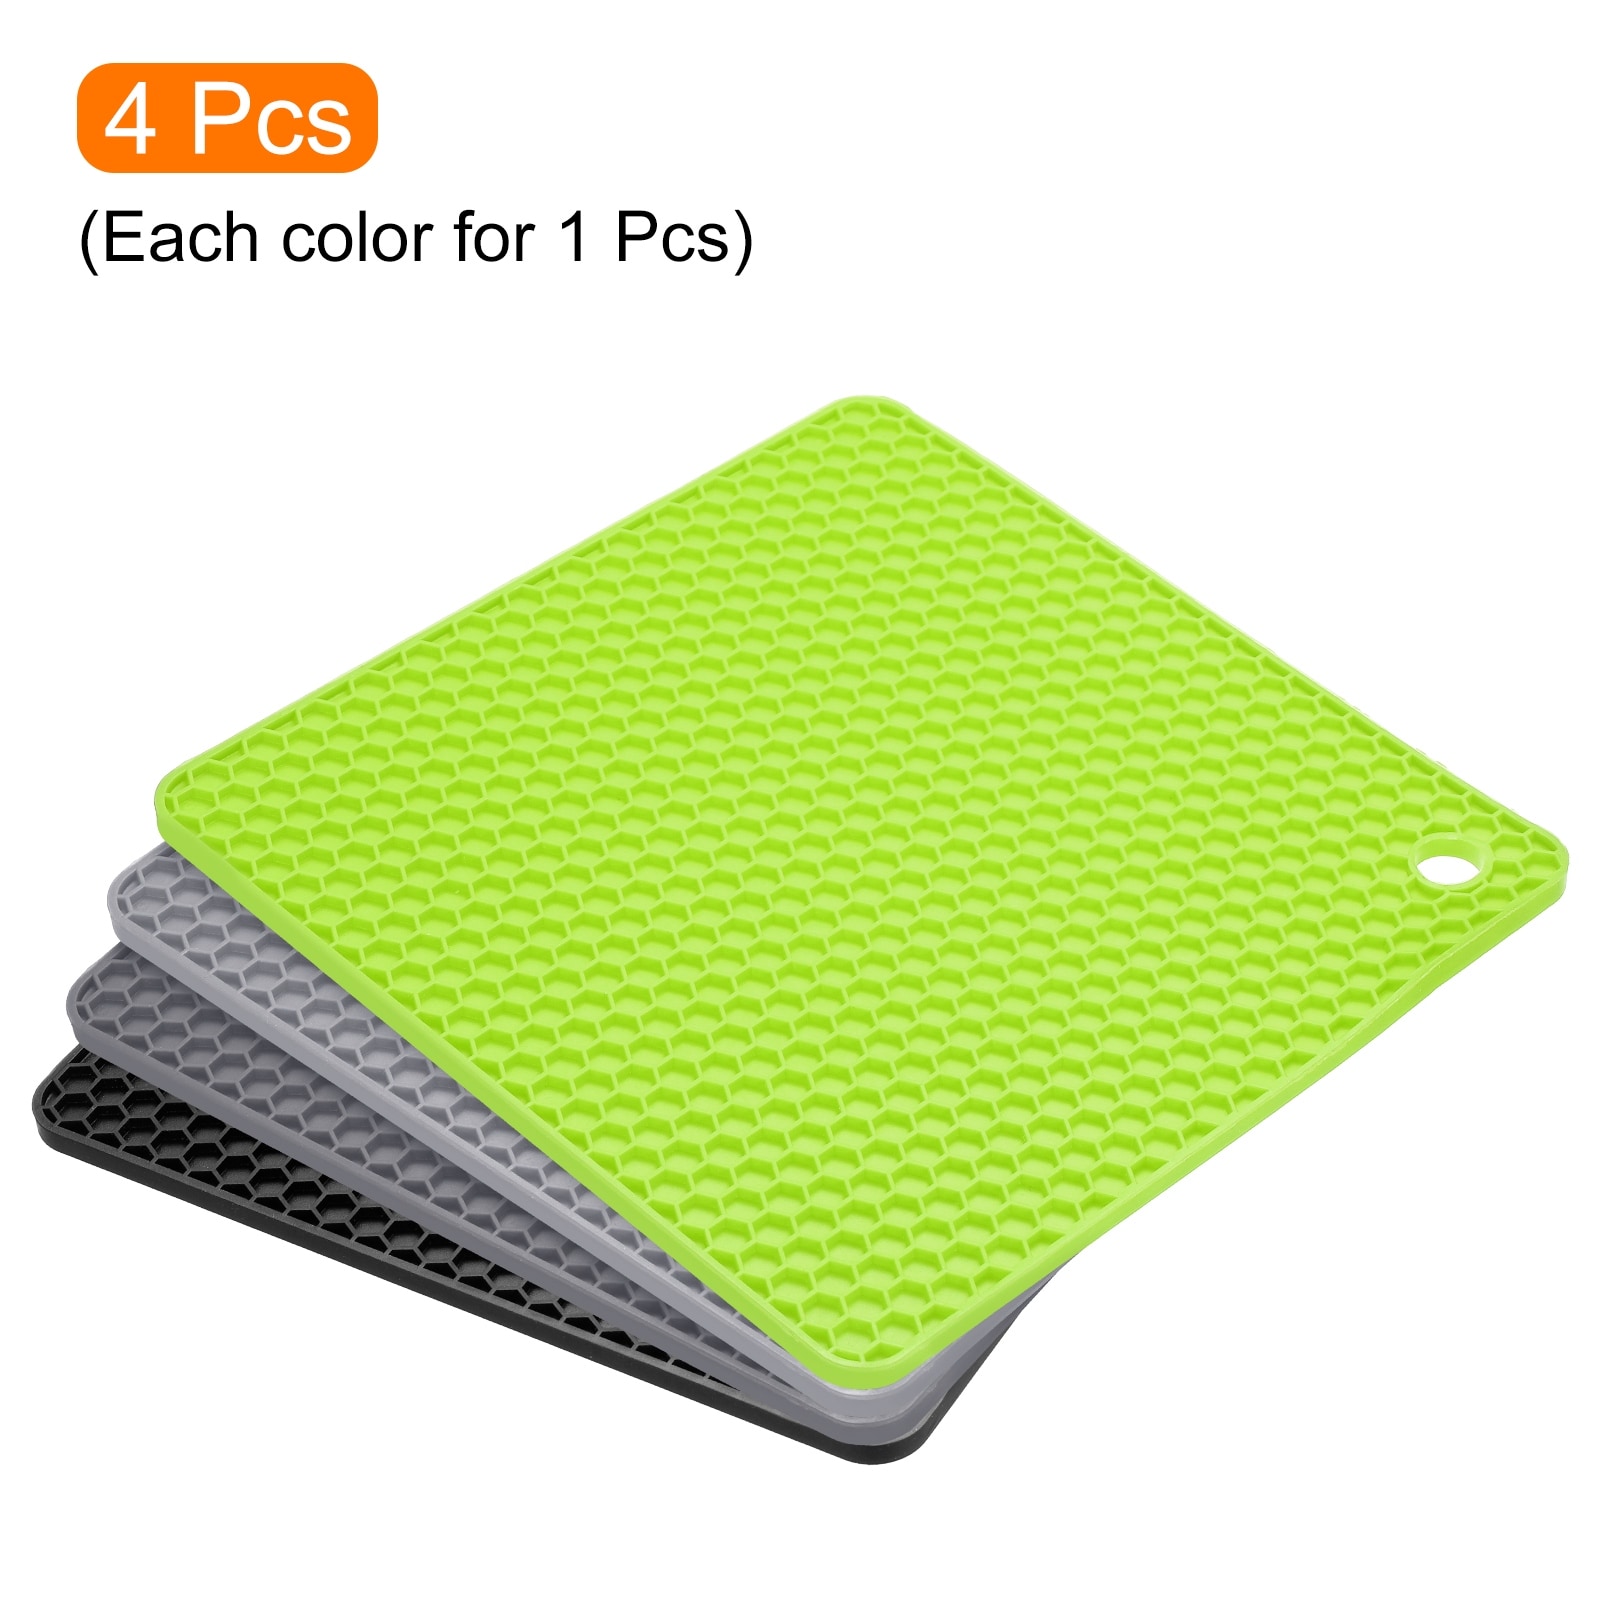 https://ak1.ostkcdn.com/images/products/is/images/direct/9a53595319822774b37116981f7d62cdad0f5160/4pcs-Silicone-Pot-Holder-Trivet-Mat-Hot-Pads-Table-Placemat-Multicolor.jpg